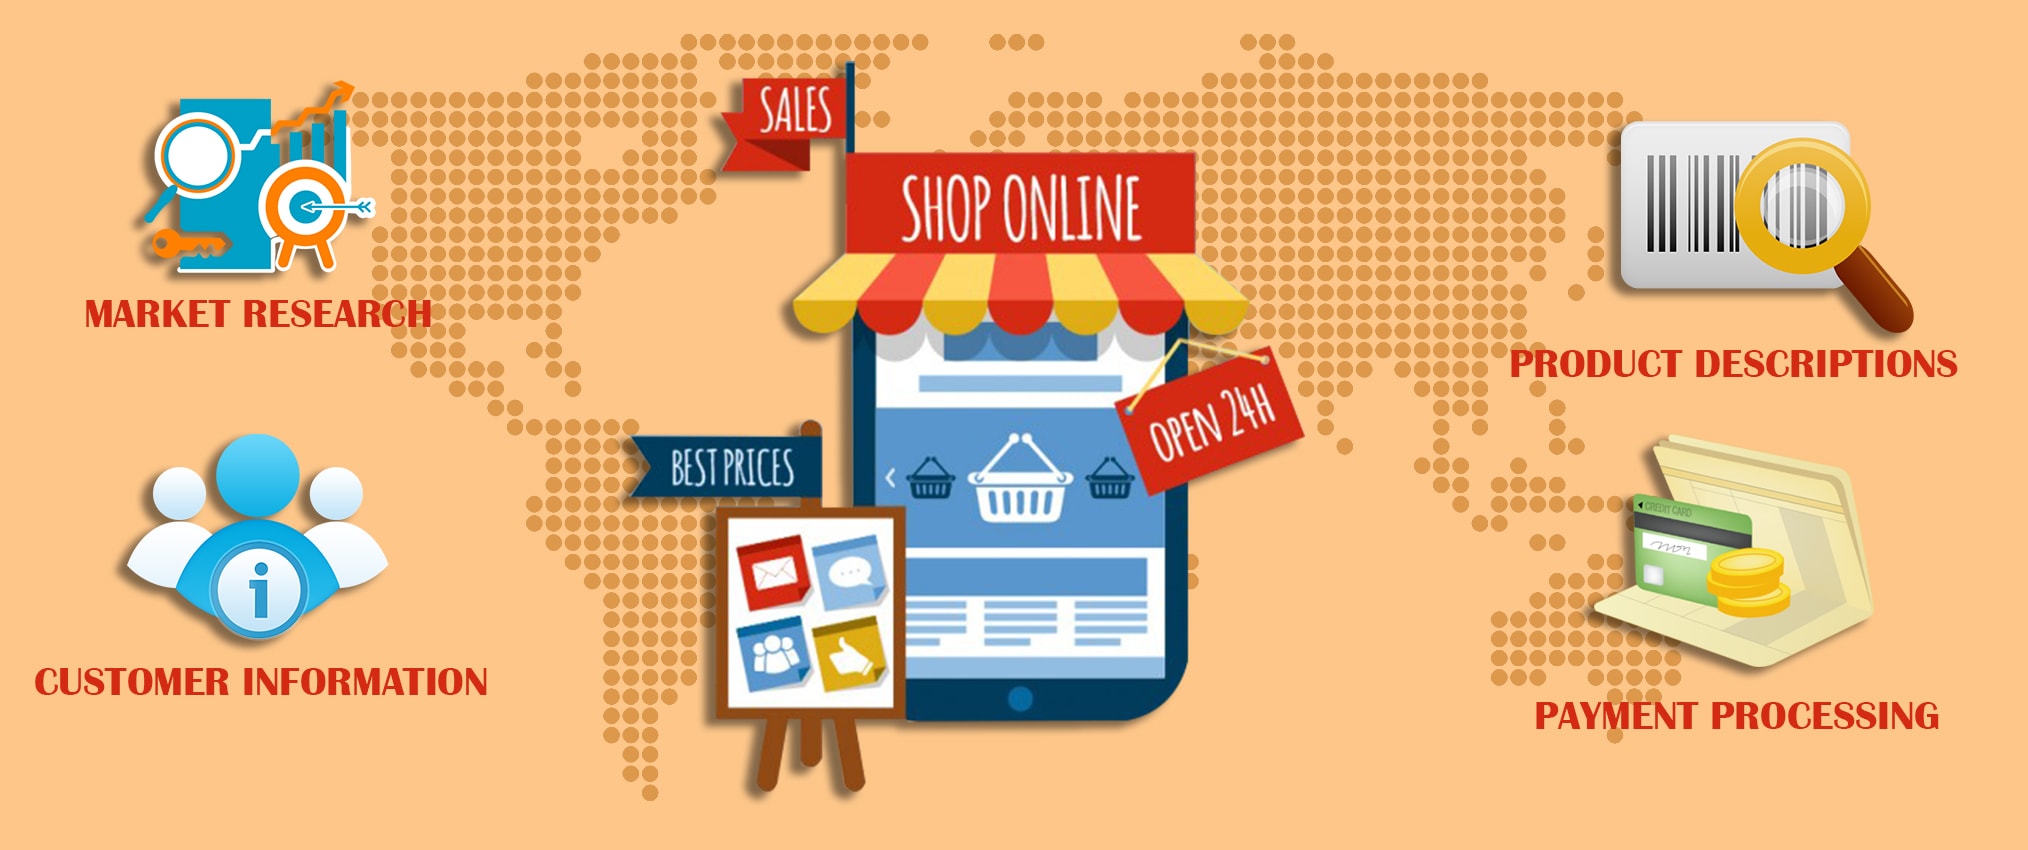 E-commerce Sales with Data Processing